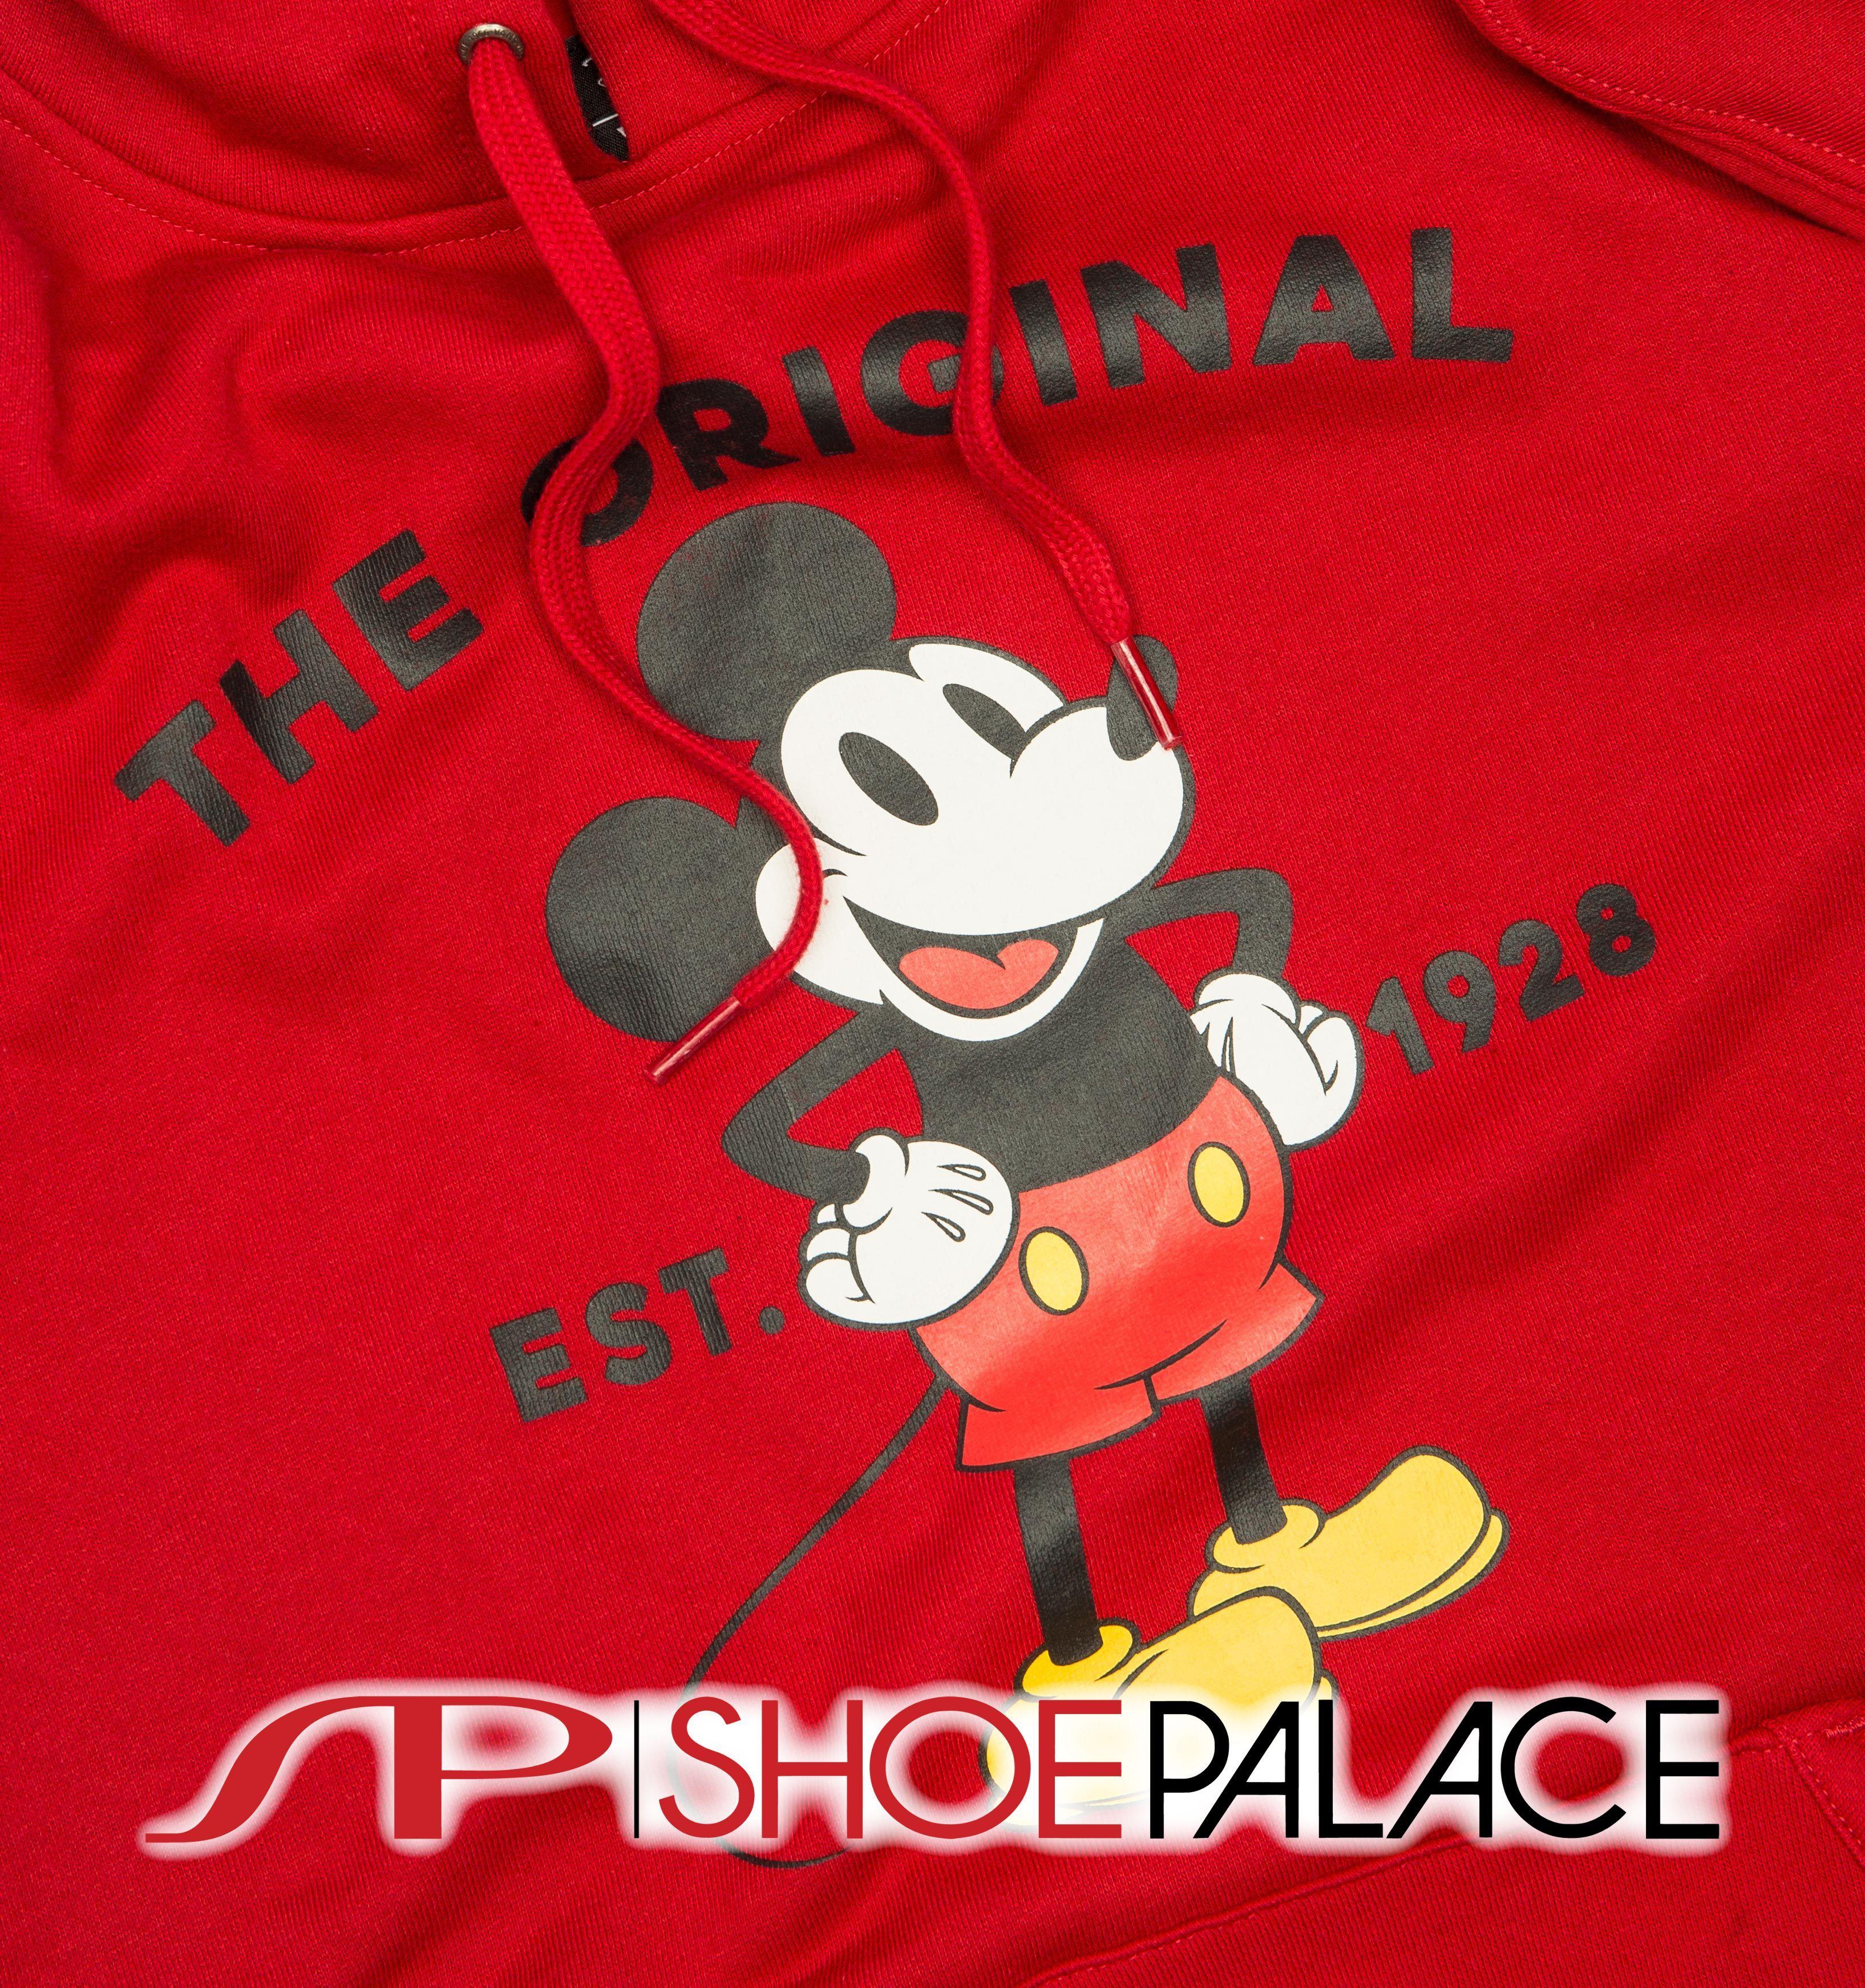 Red and Black Disney Logo - Vans VN0A3IKD14A x Disney Mickey Mouse Mens Hoodie Sweater (Red ...